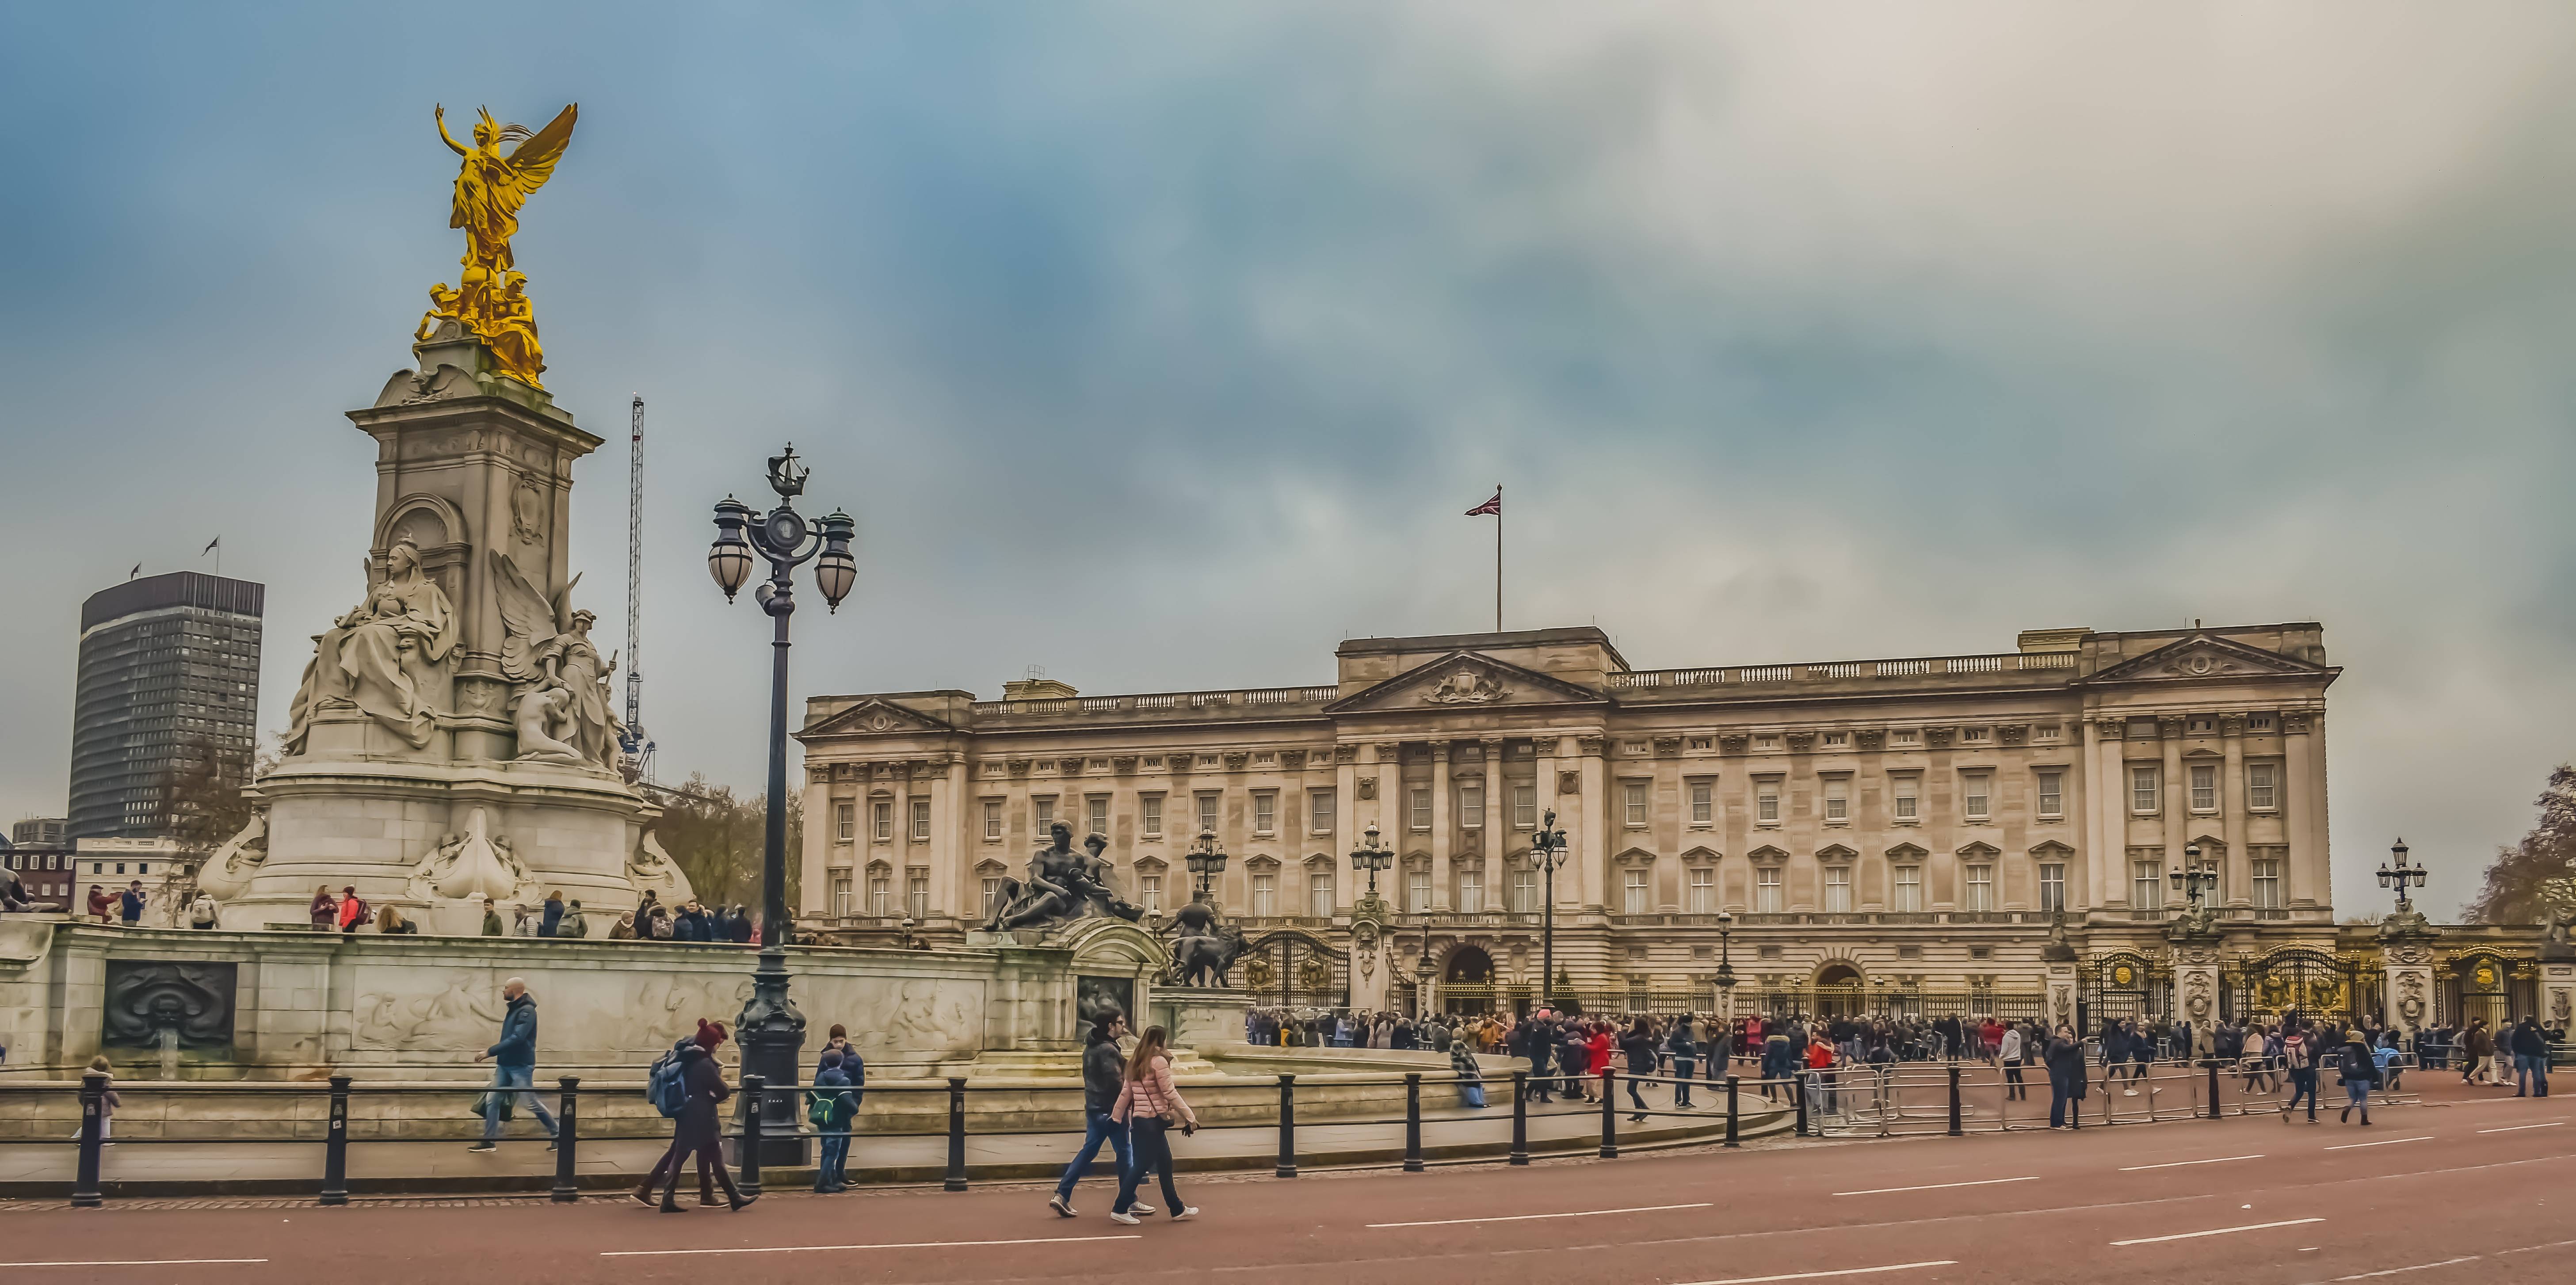 Buckingham Palace, UK is one of the most valuable palaces in the world - London Airport Transfers